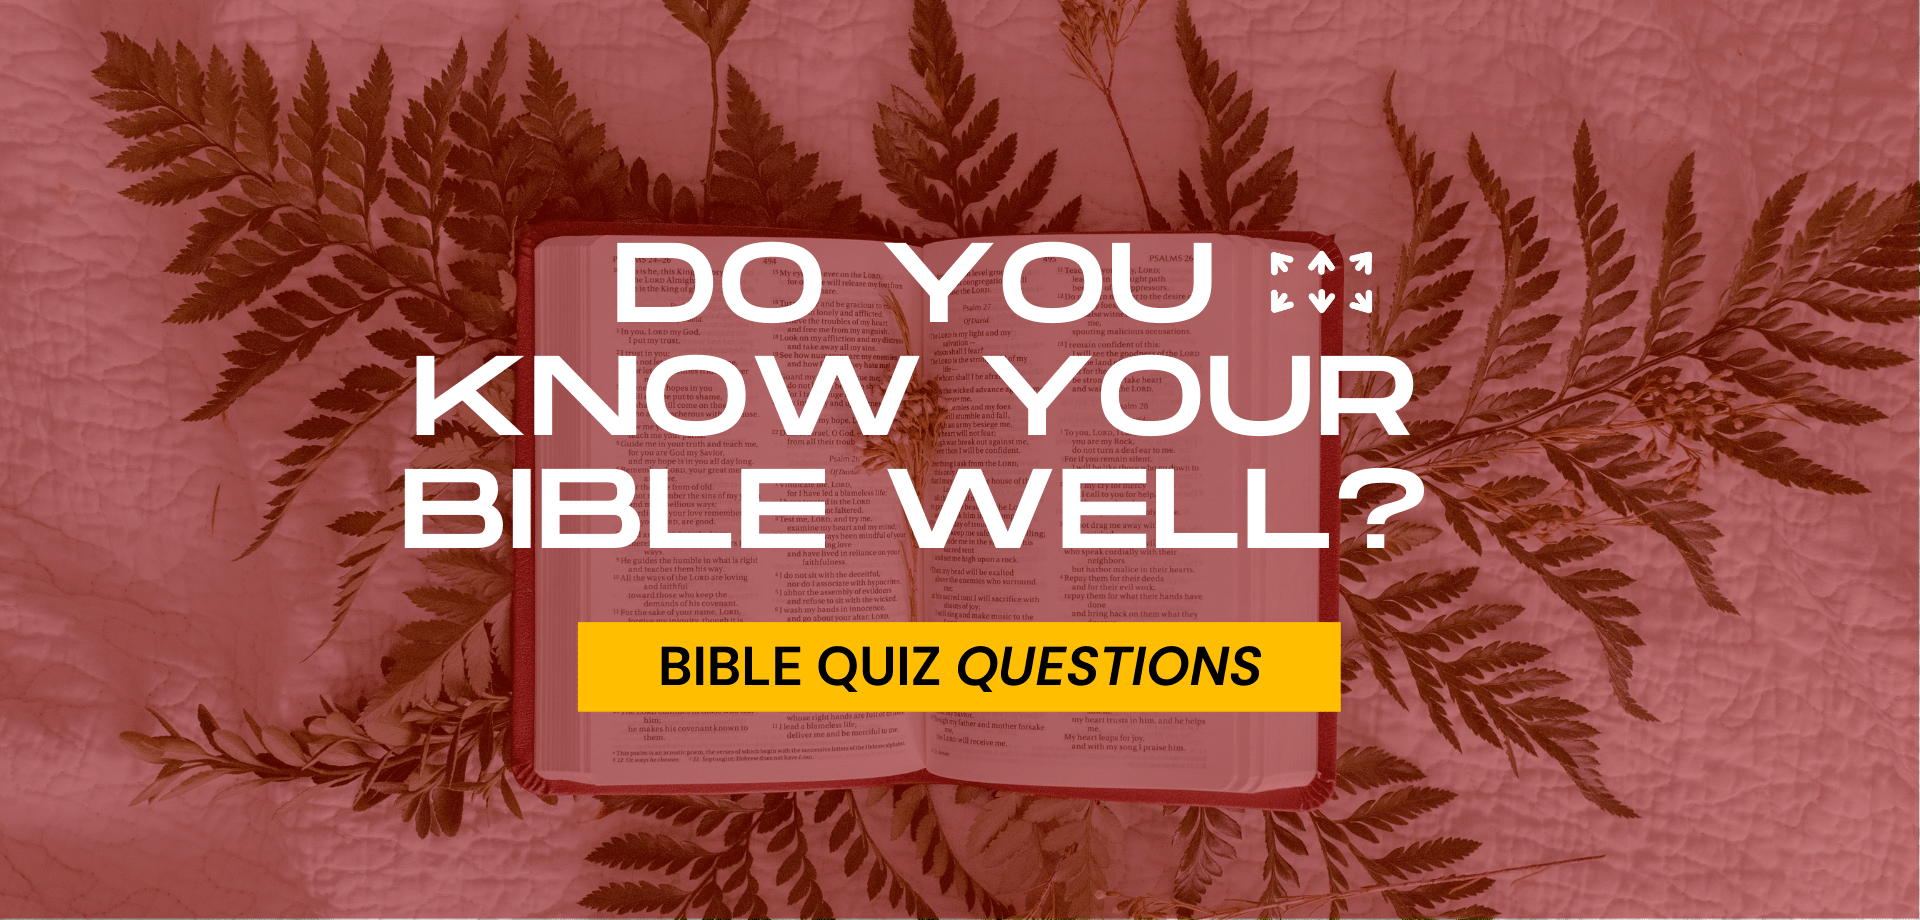 Do you know your bible well?